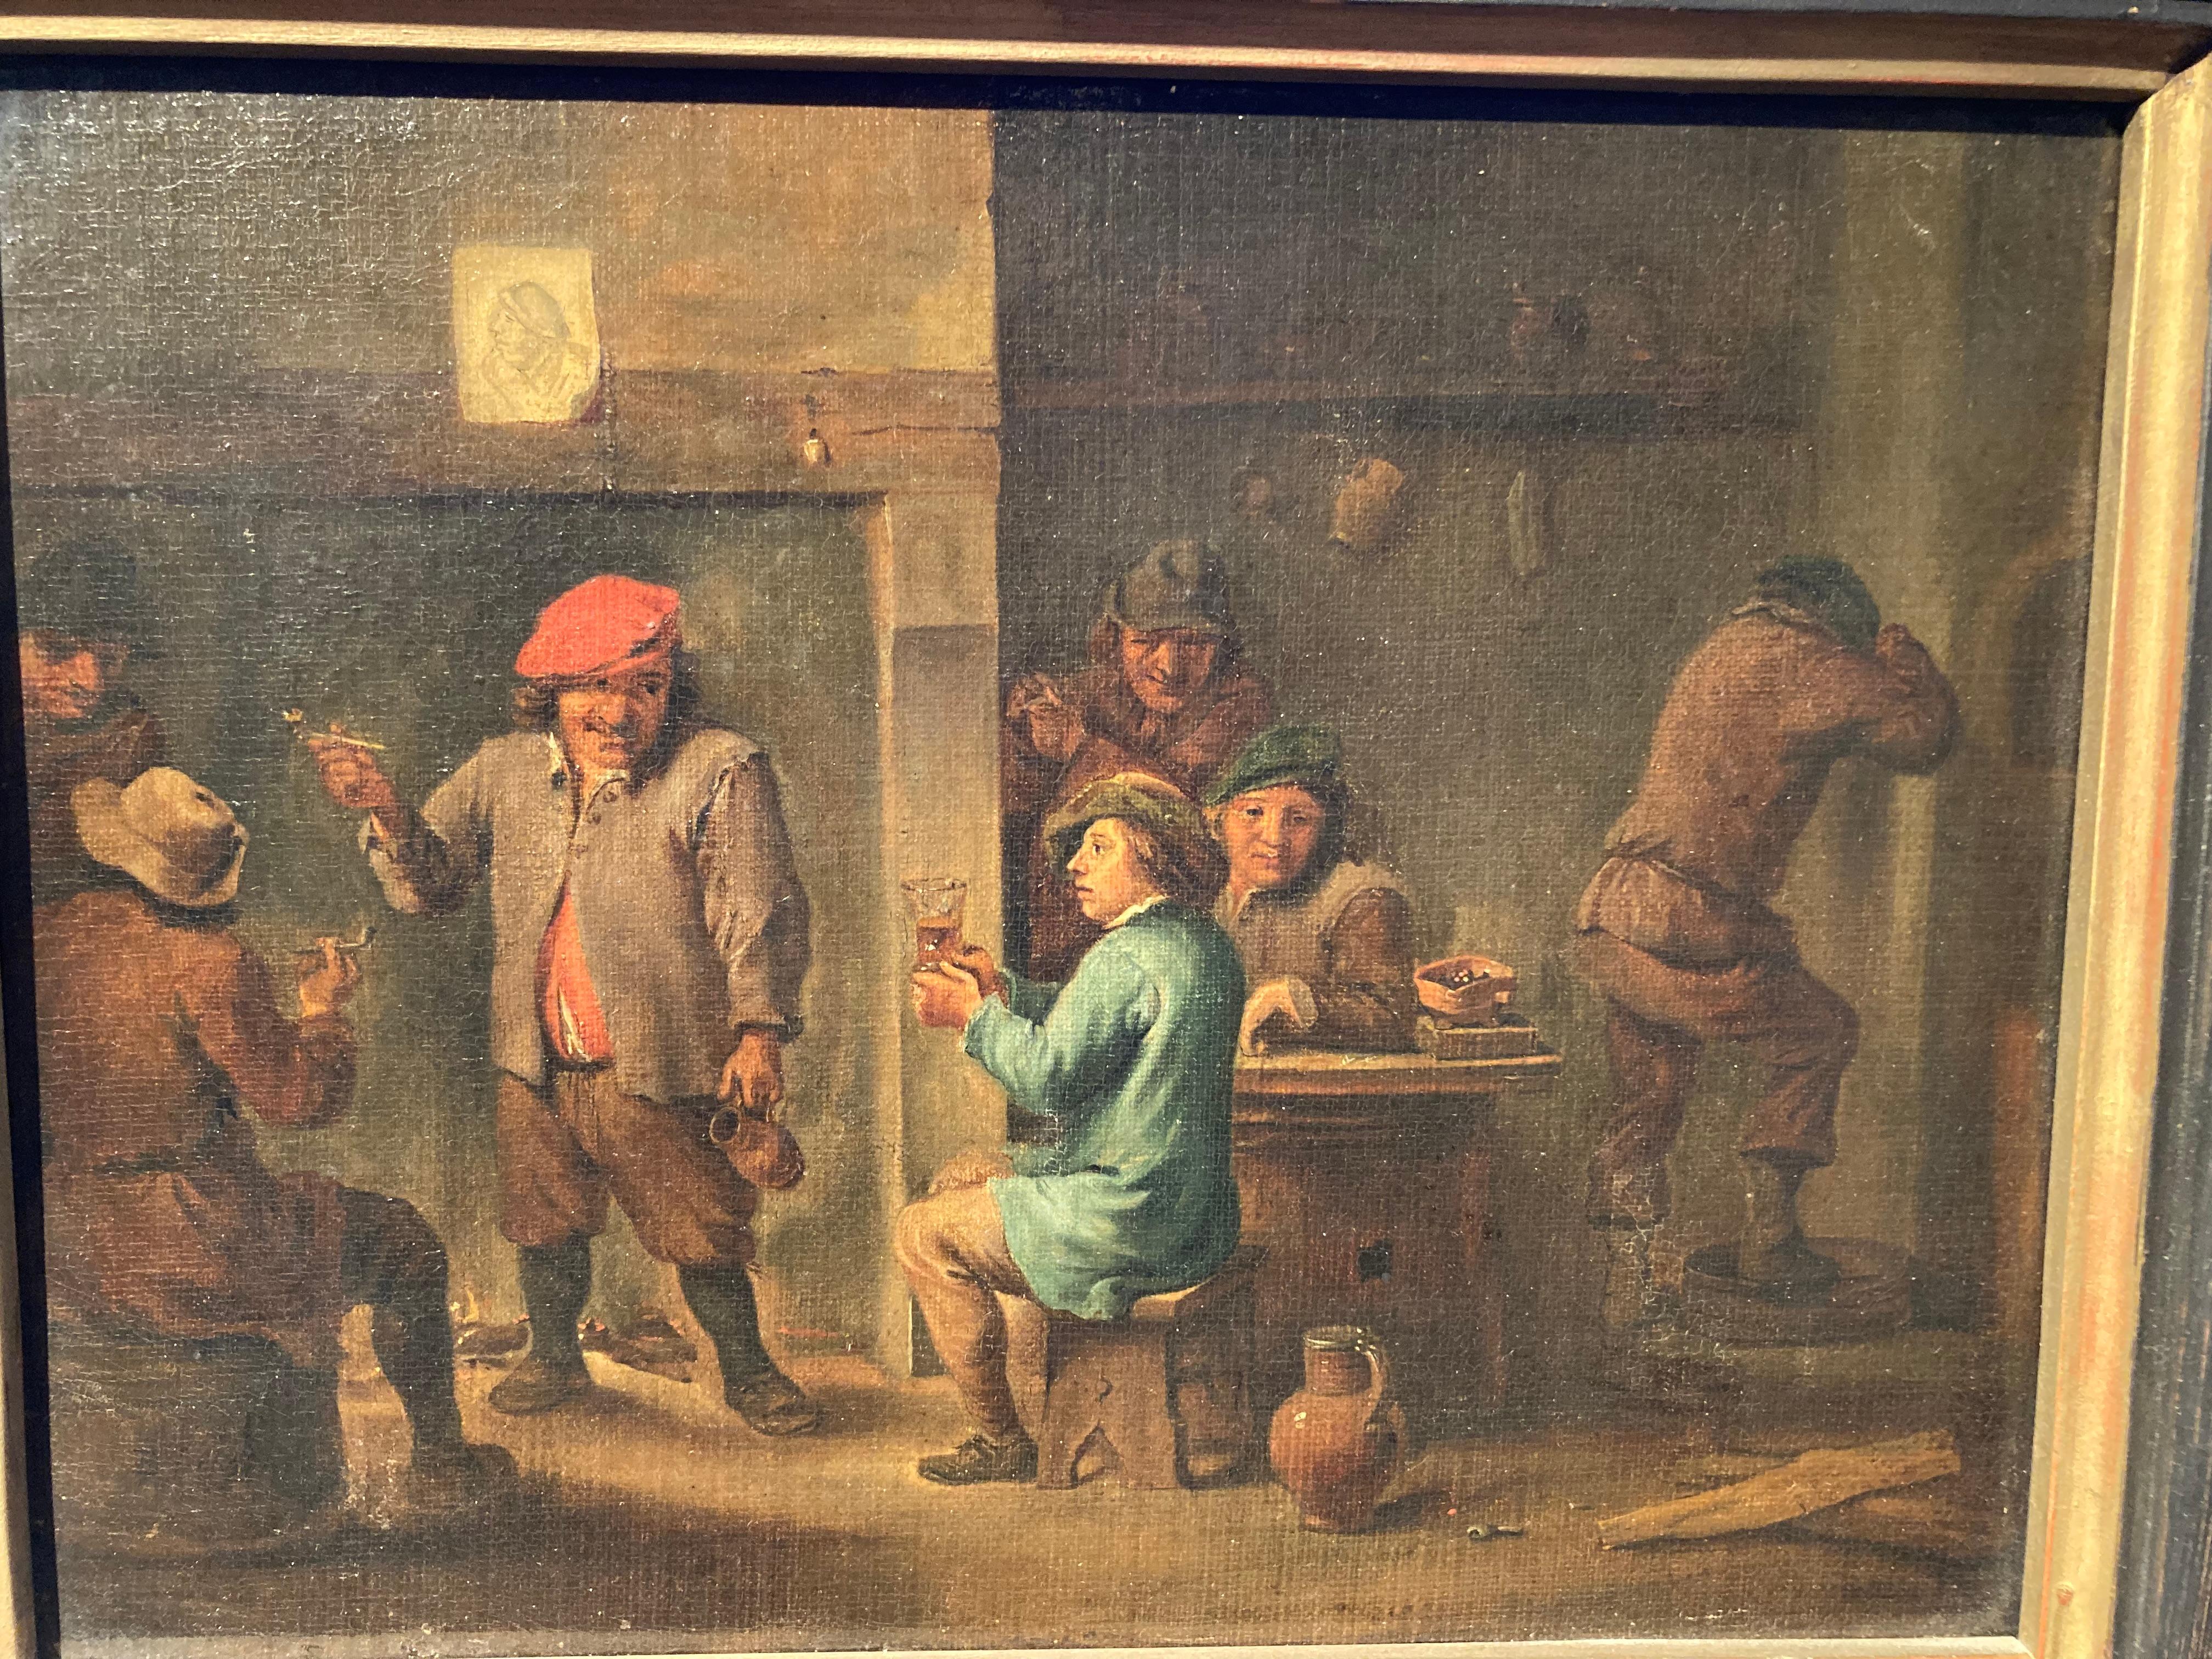 Circle Teniers, Flemish Art, Peasants smoking and drinking in a Tavern Interior - Baroque Painting by David Teniers the Younger